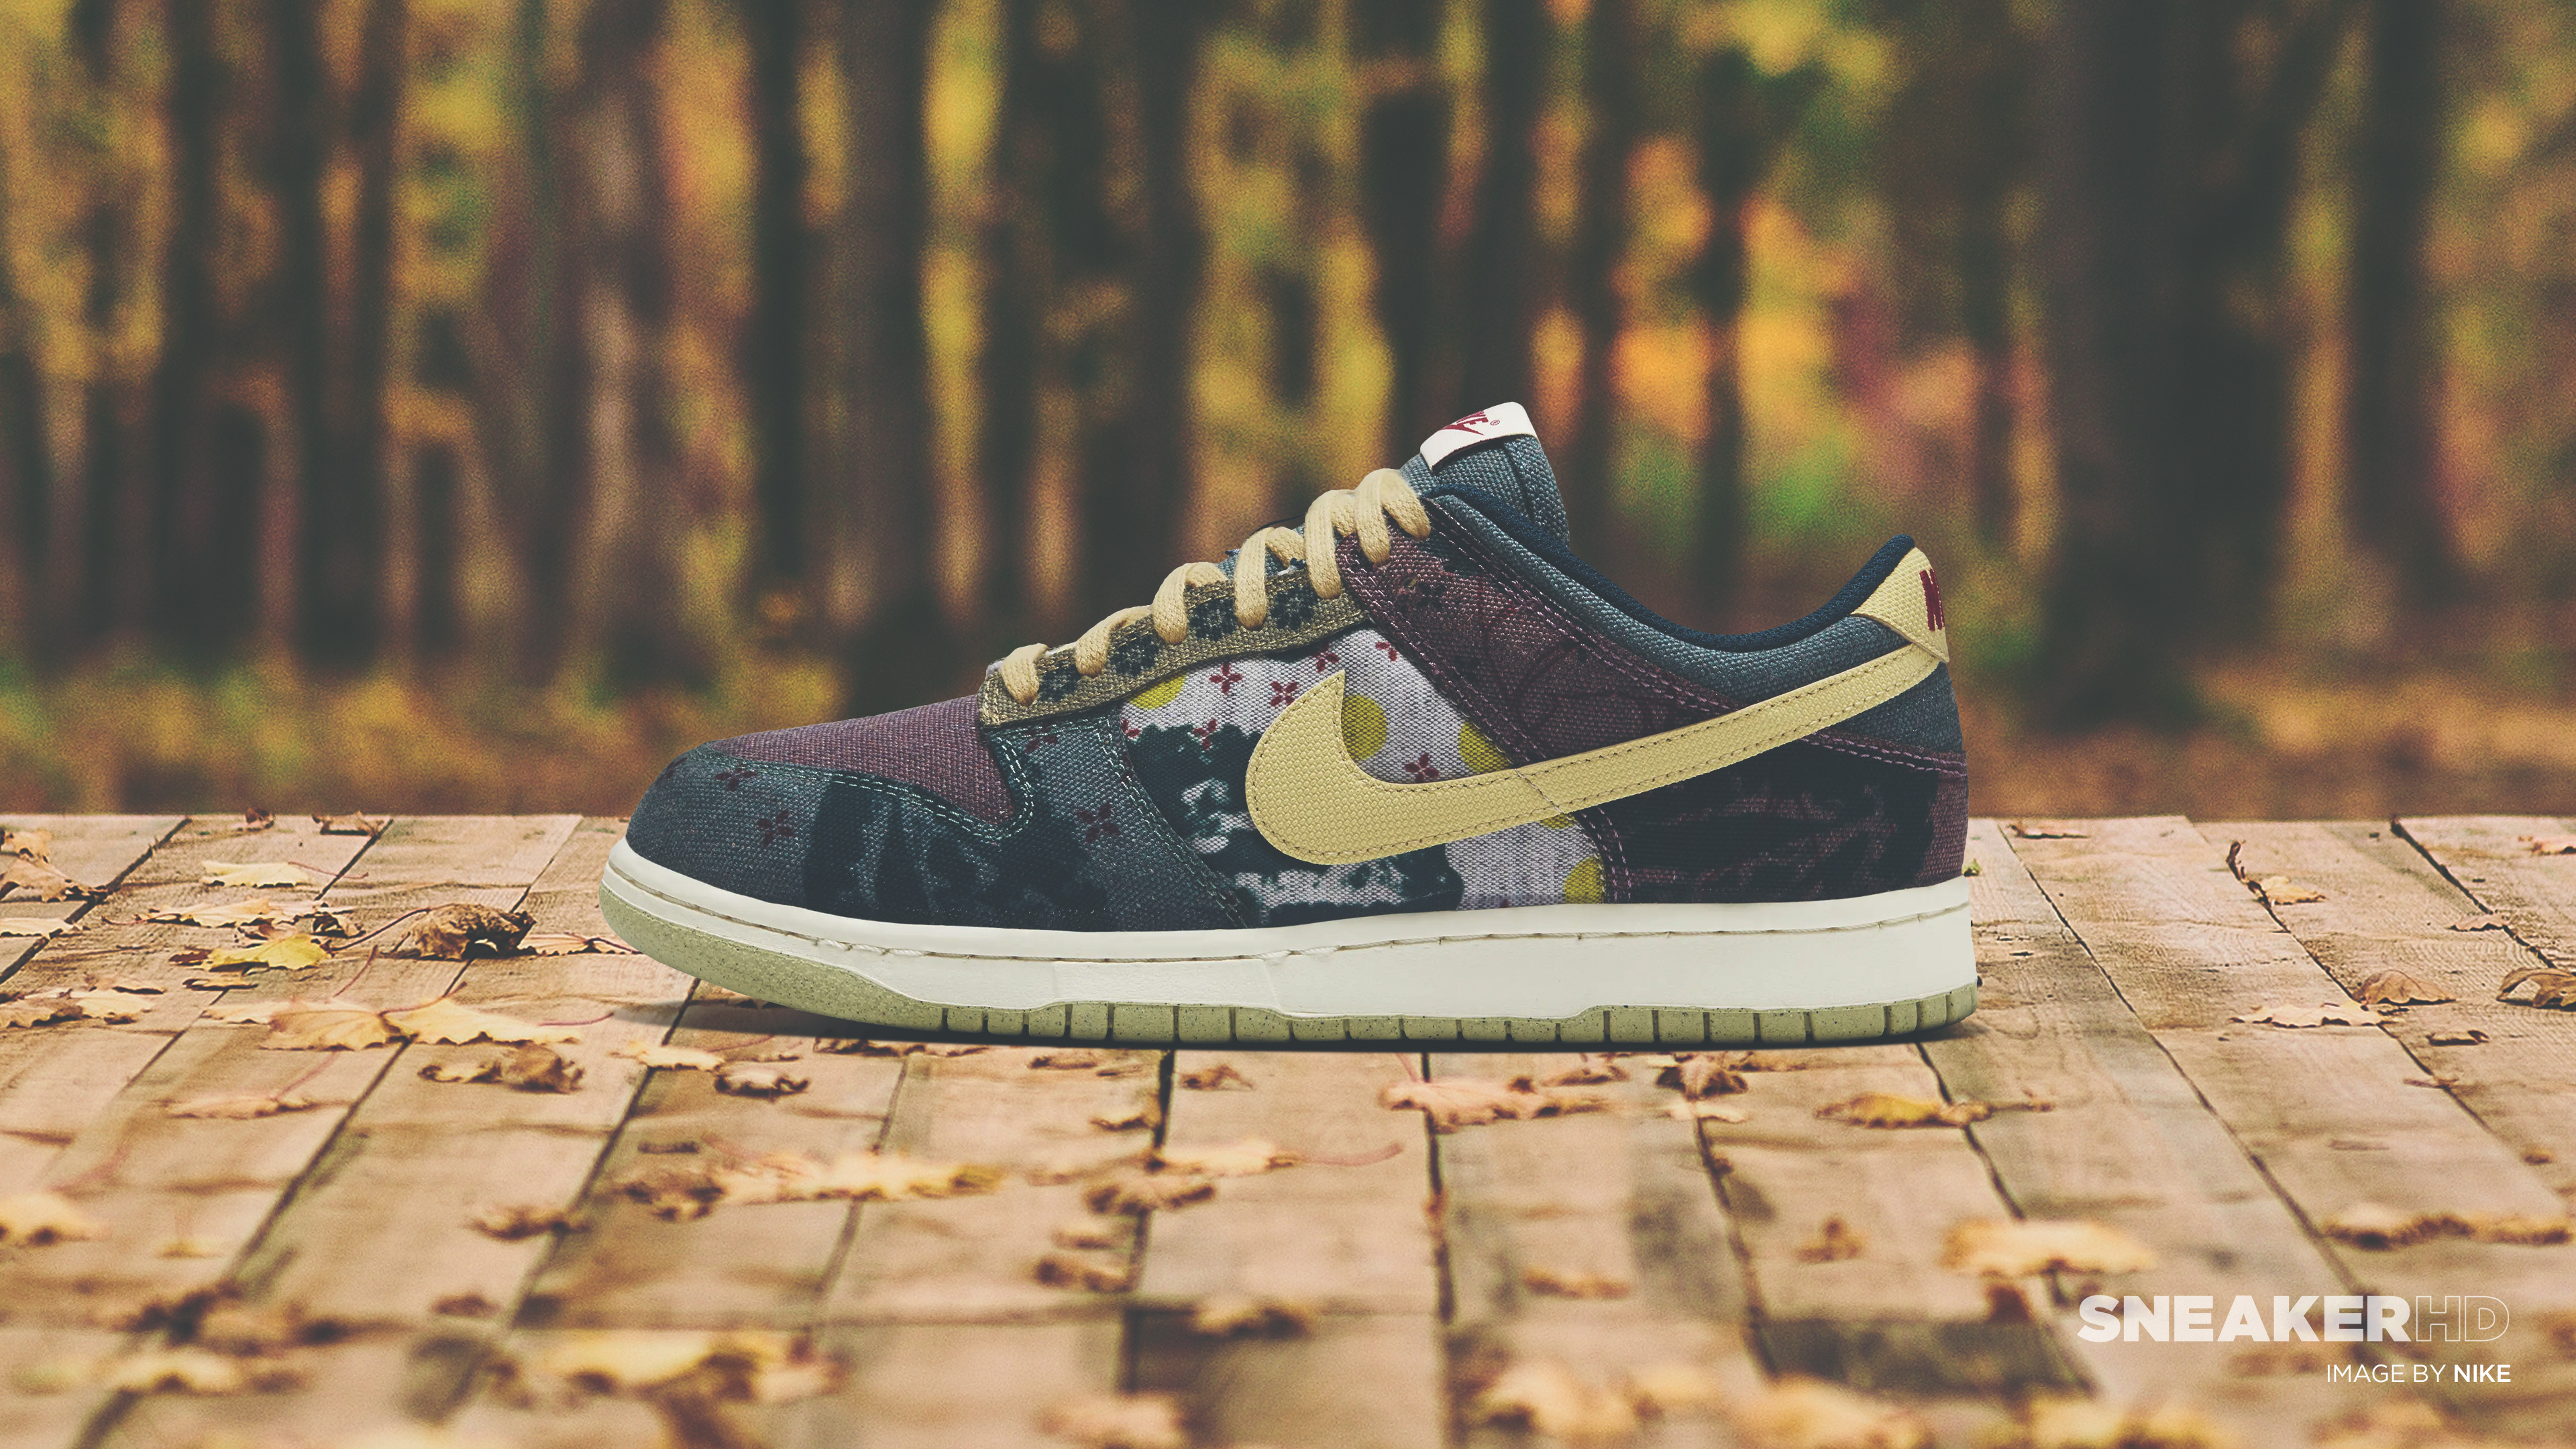 Â your favorite sneakers in k retina mobile and hd wallpaper resolutions nike sb dunk low archives